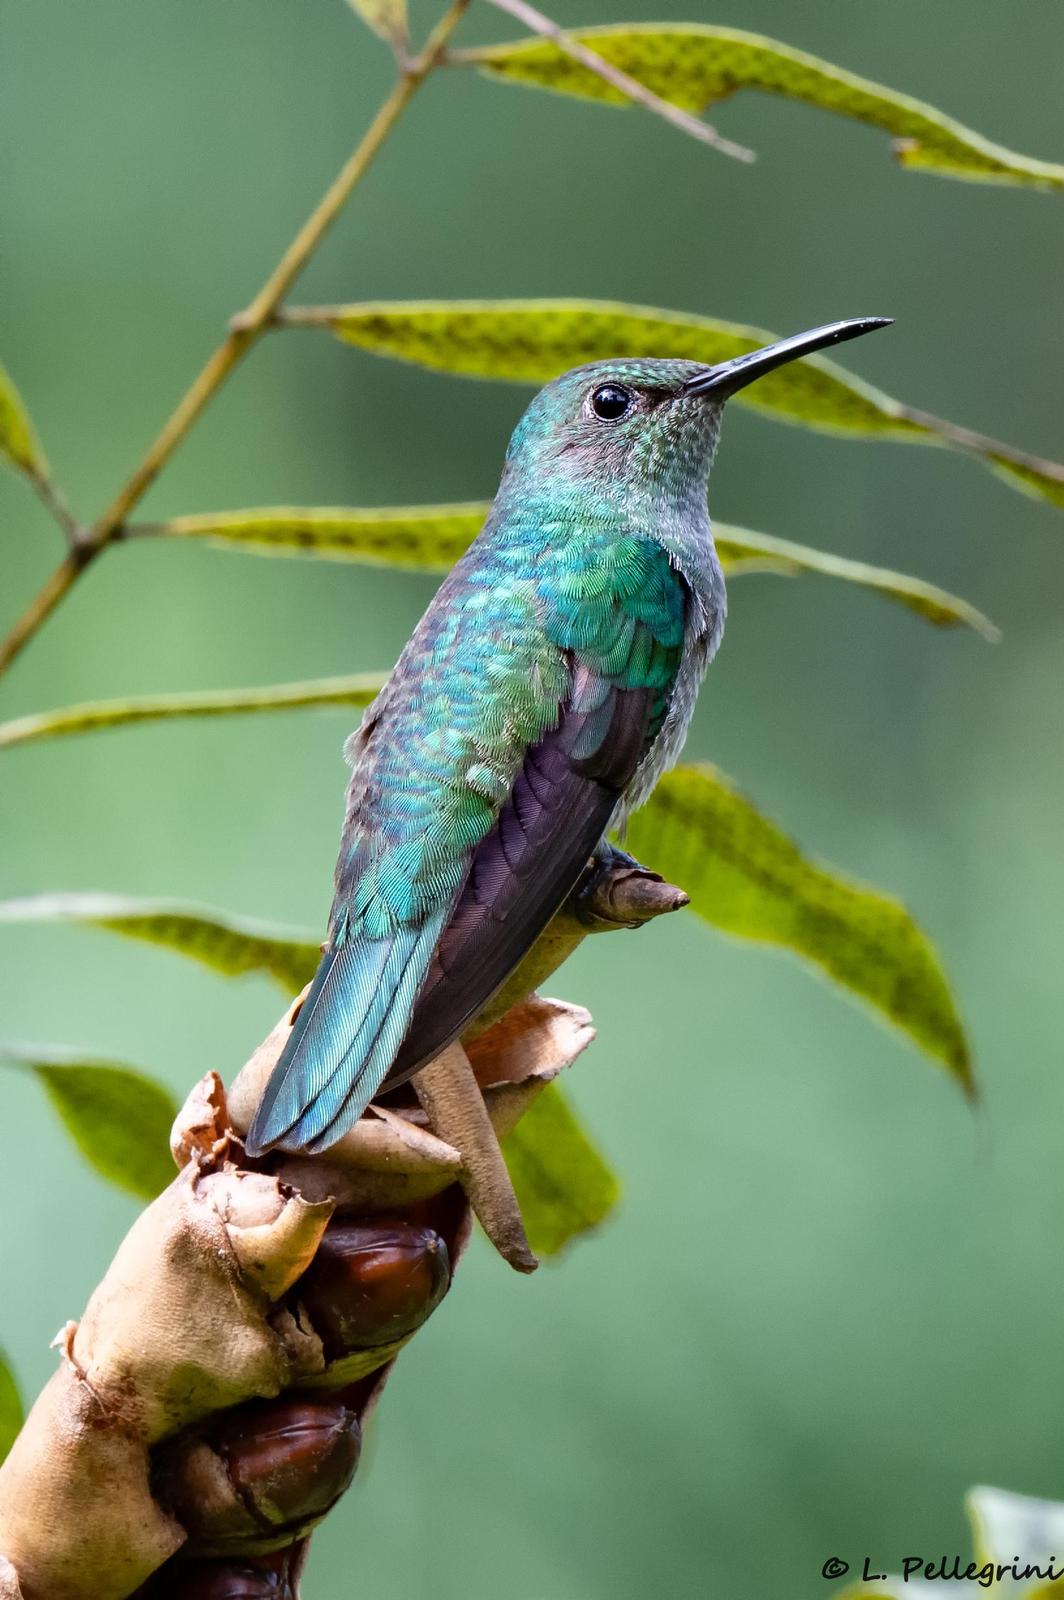 Scaly-breasted Hummingbird Photo by Laurence Pellegrini